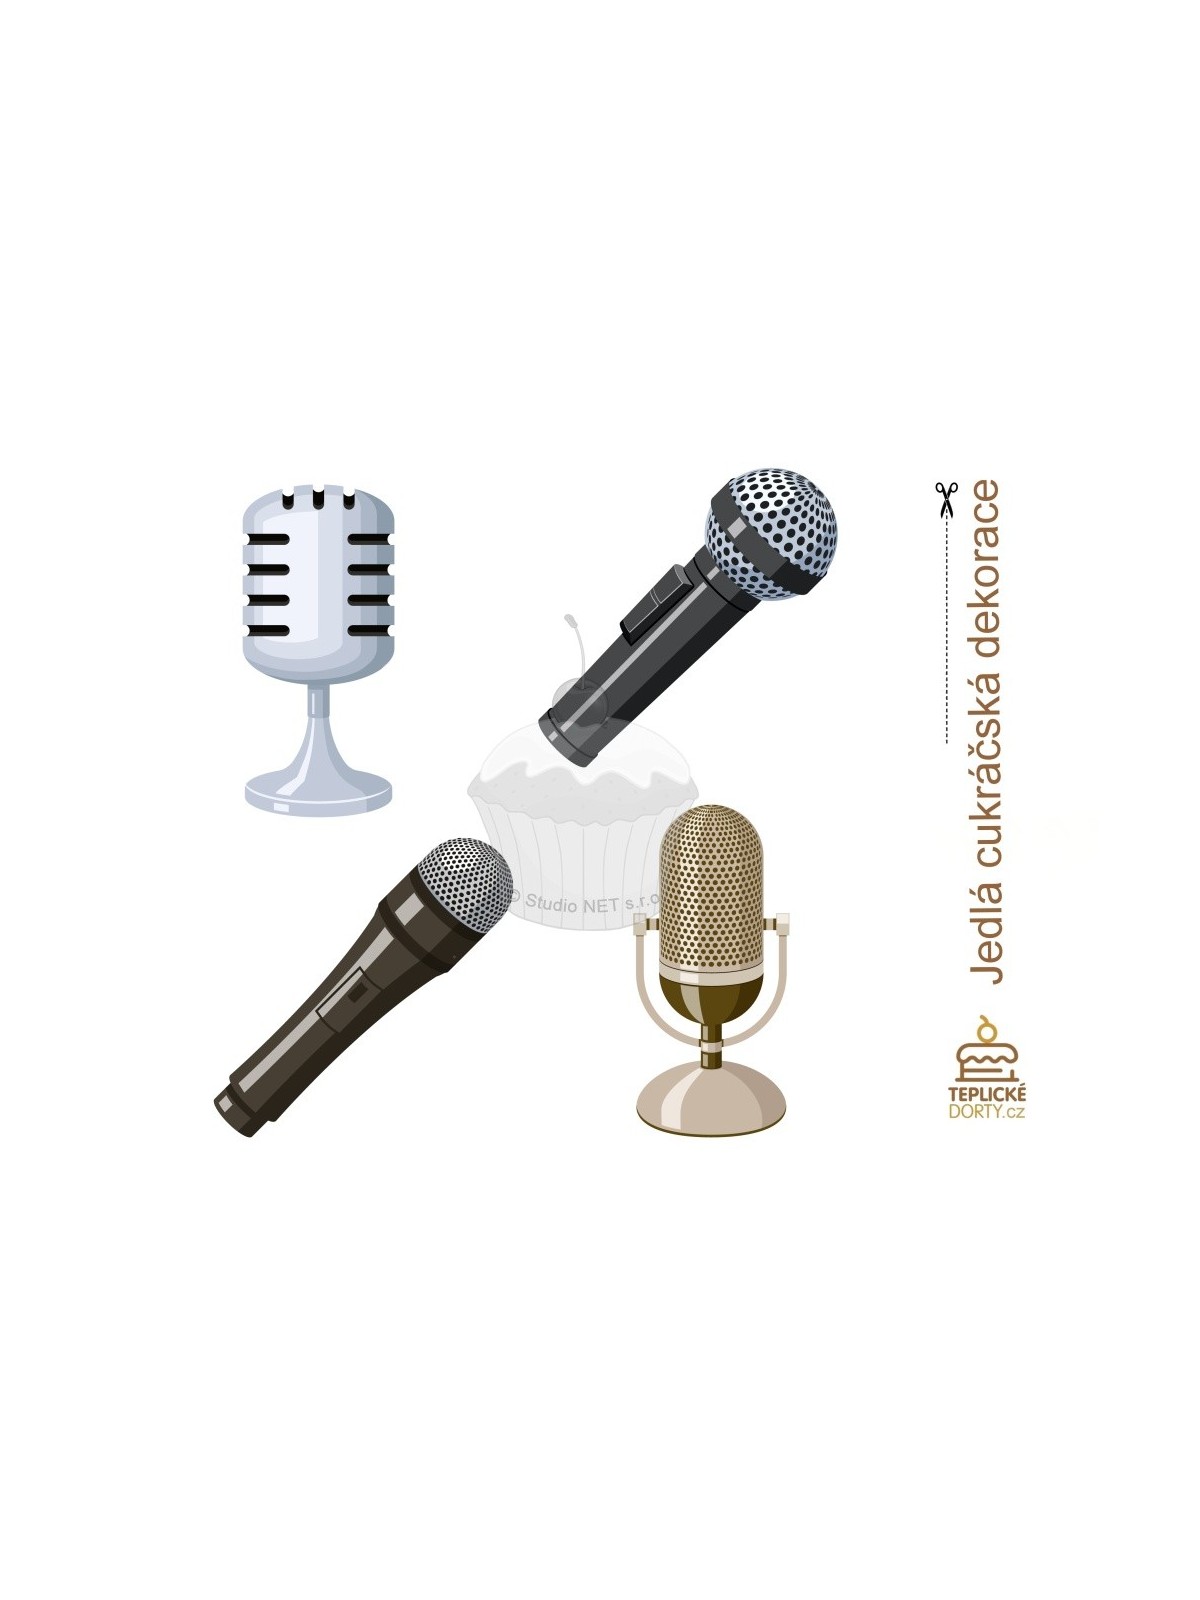 Edible paper "Music 14" Microphones - A4